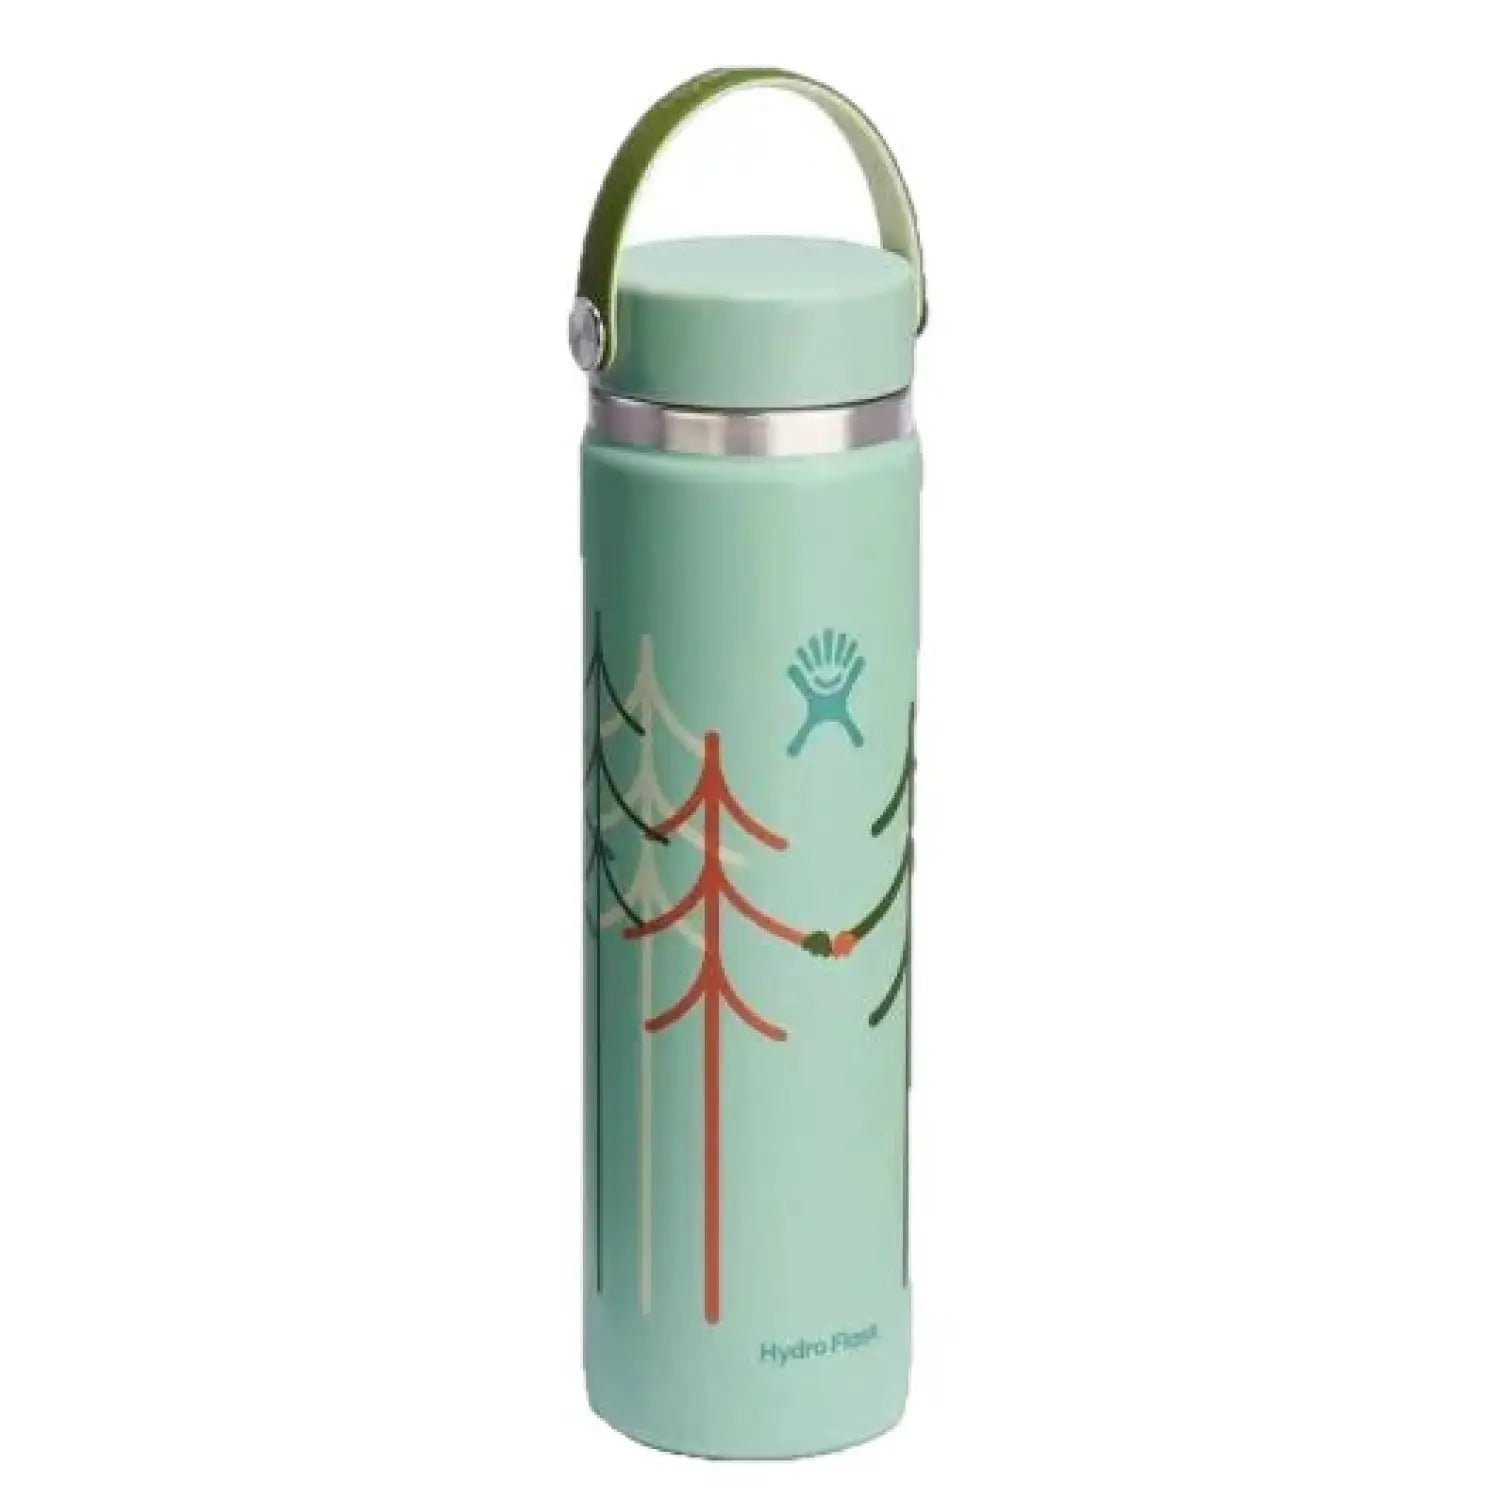 Hydro Flask Let's Go Together 24 oz Wide Mouth with Flex Cap shown in TreeLine Green option. Aqua water bottle with red, green, white, and blue trees. Blue Hydro Flask logo. Shown with Aqua colored cap with green handle.